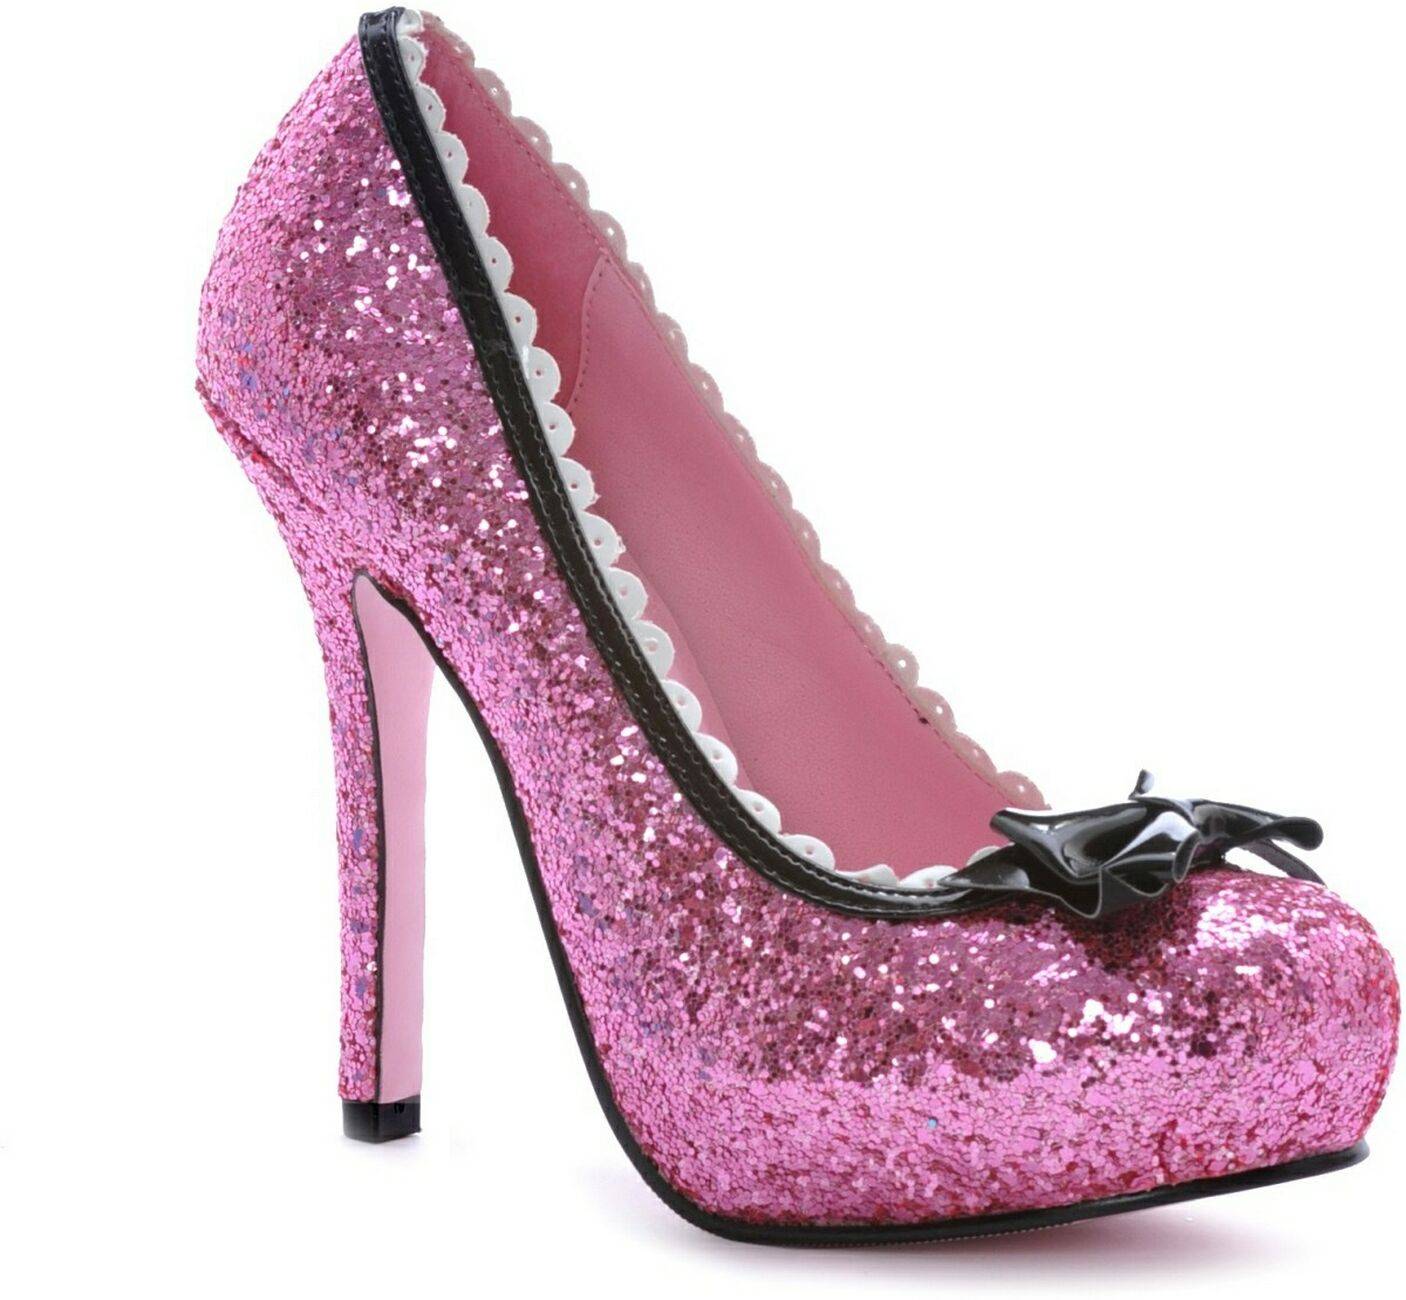 Glittery High Heel Tip Of The Fashion D